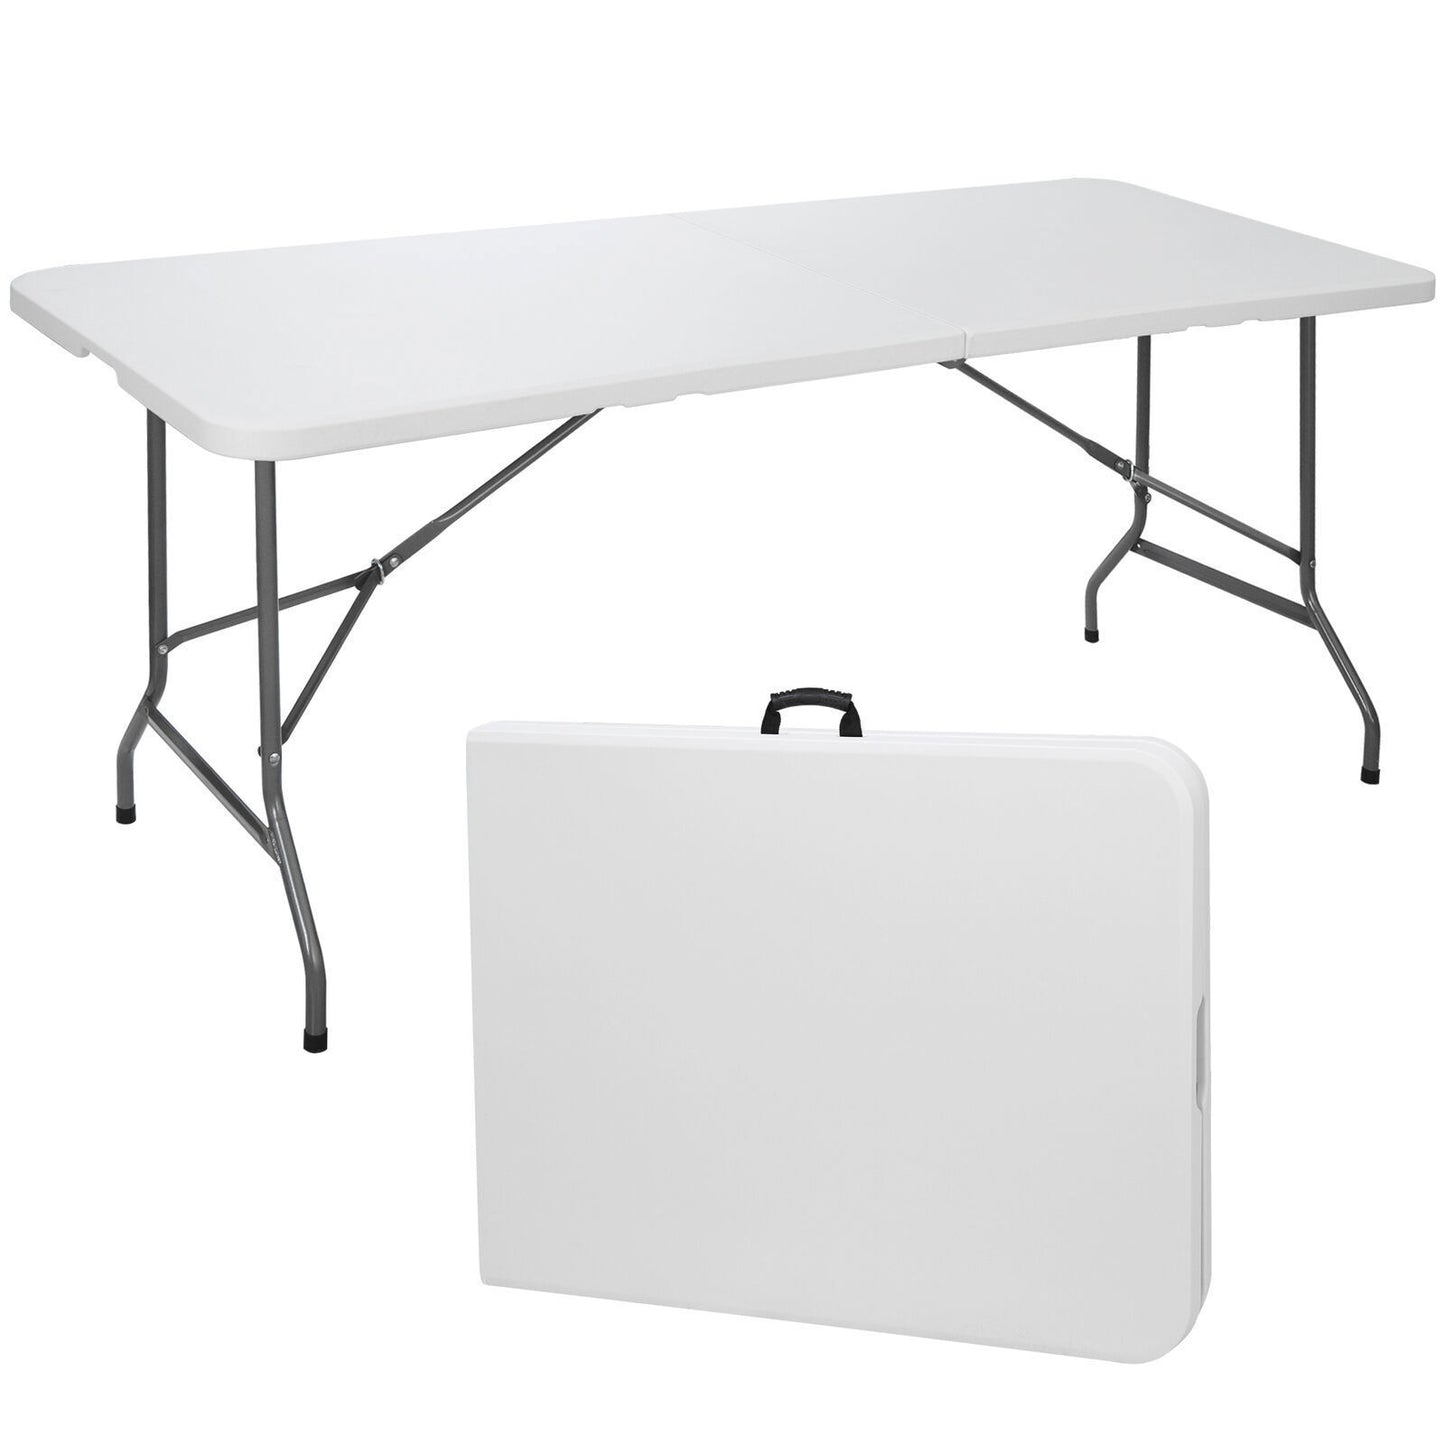 4PCS 6ft Folding Table Portable Indoor Outdoor Picnic Party Camping Tables